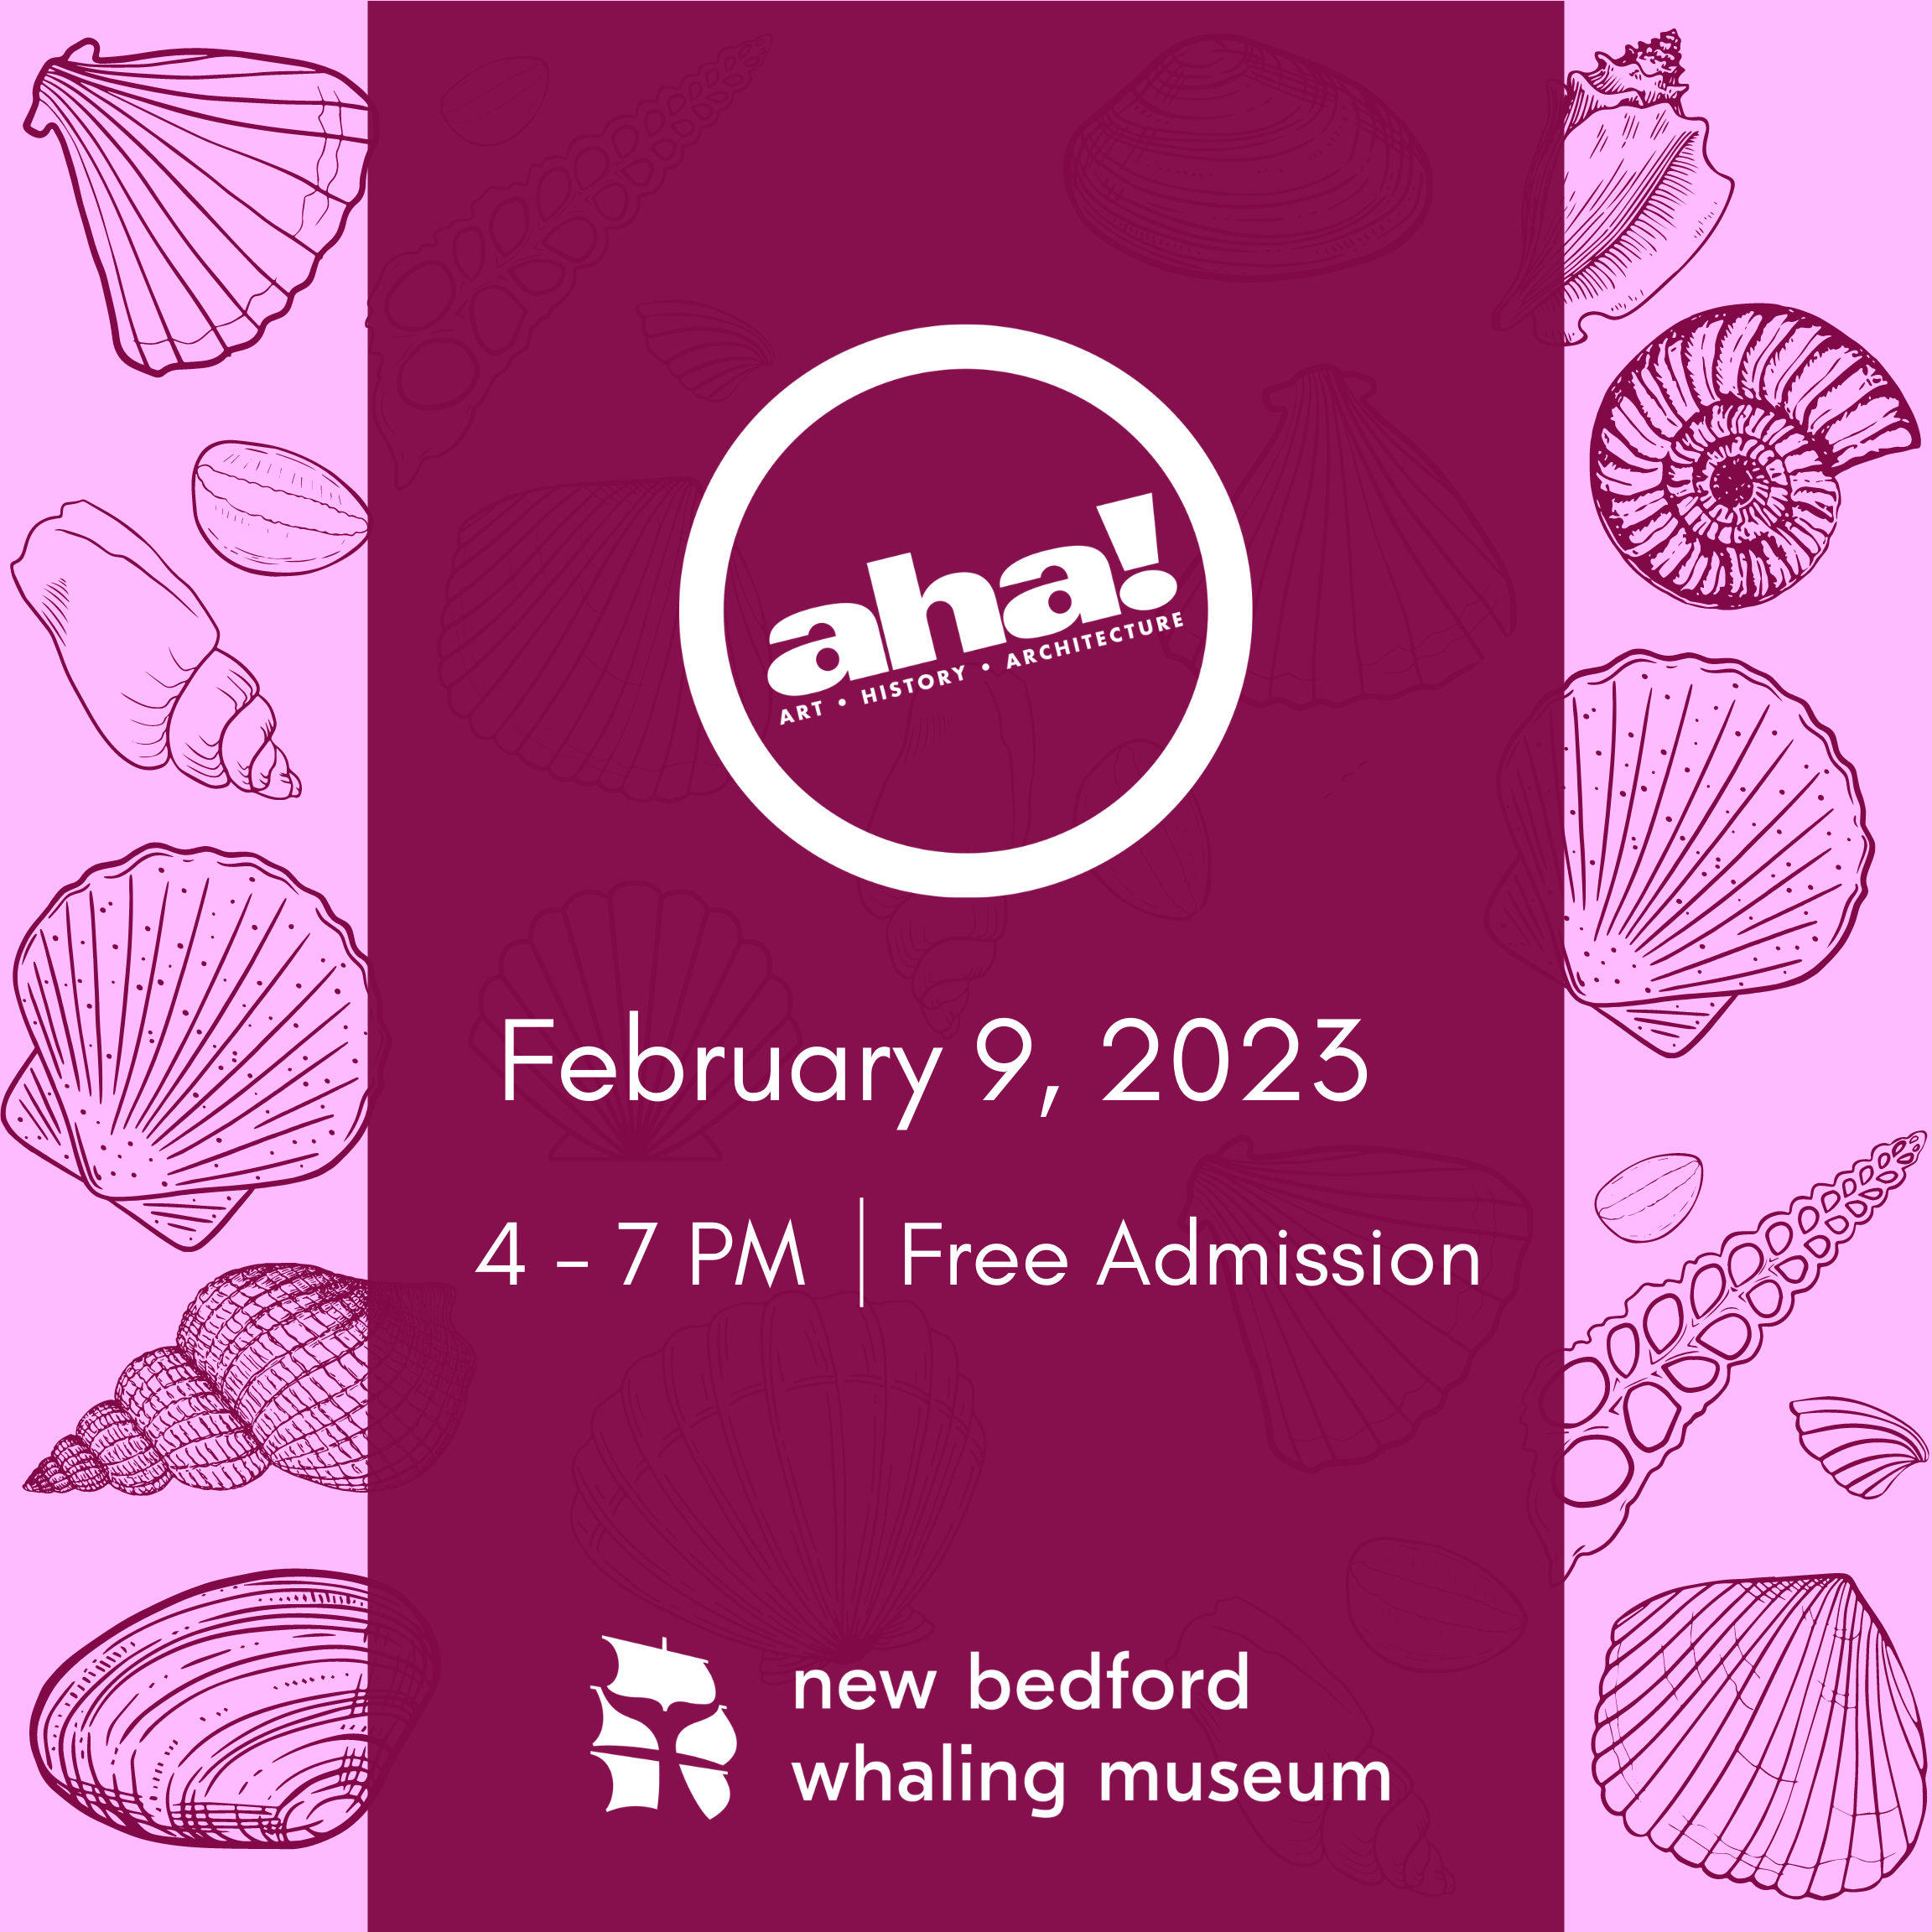 A poster for aha! "February 9, 2023 4-7 PM Free Admission"